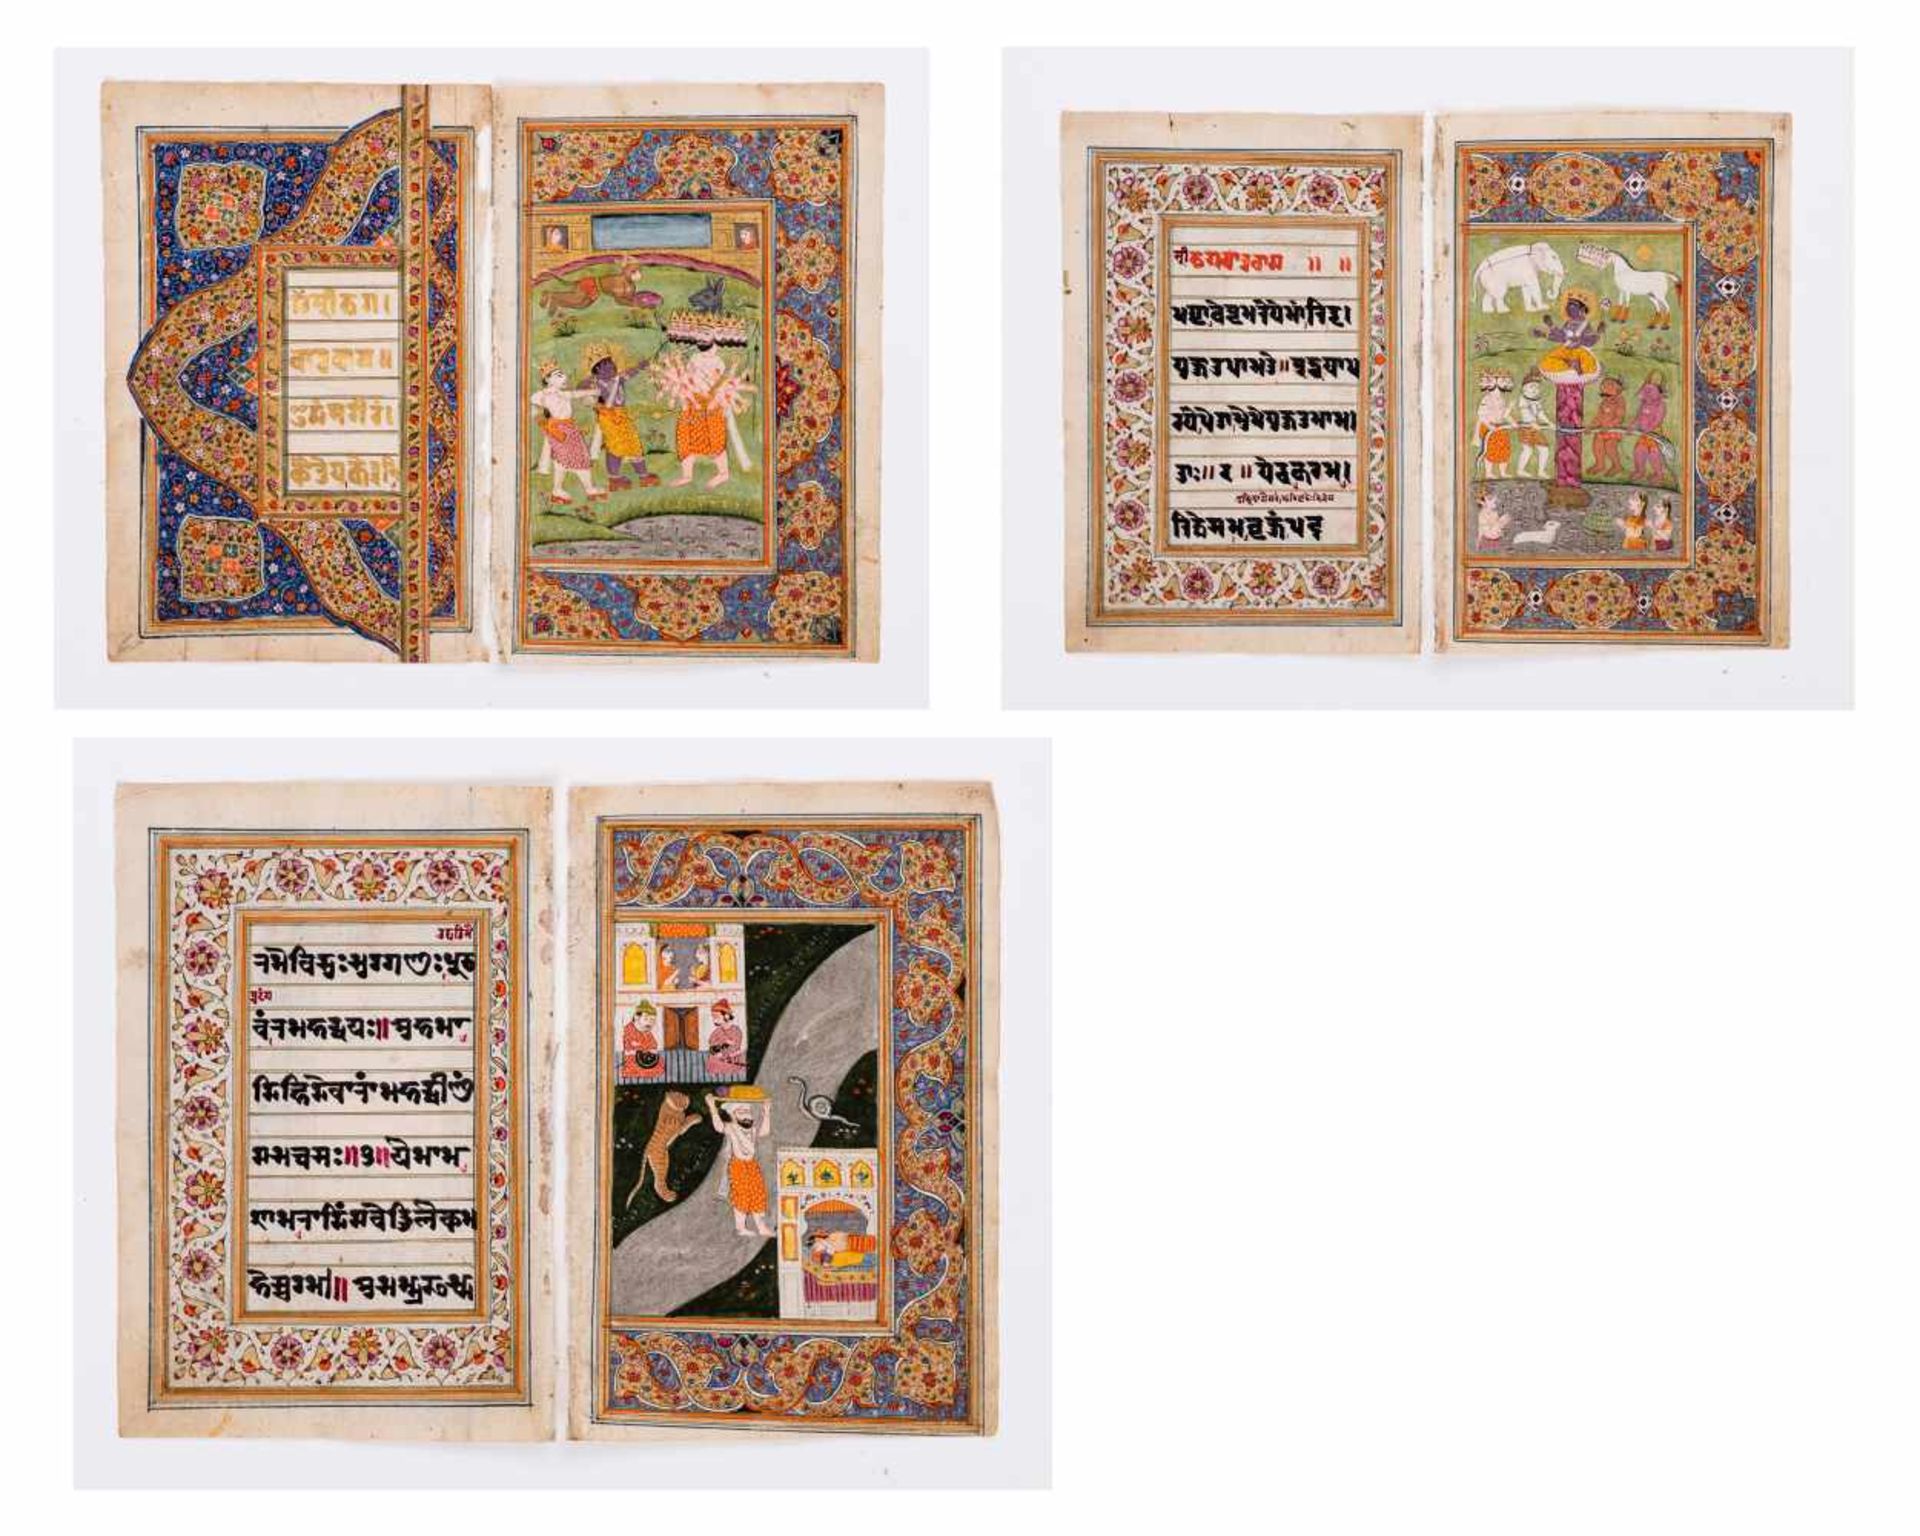 SIX INDIAN MINIATURE PAINTINGS - 19TH CENTURYMiniature painting with colors and gold on paper